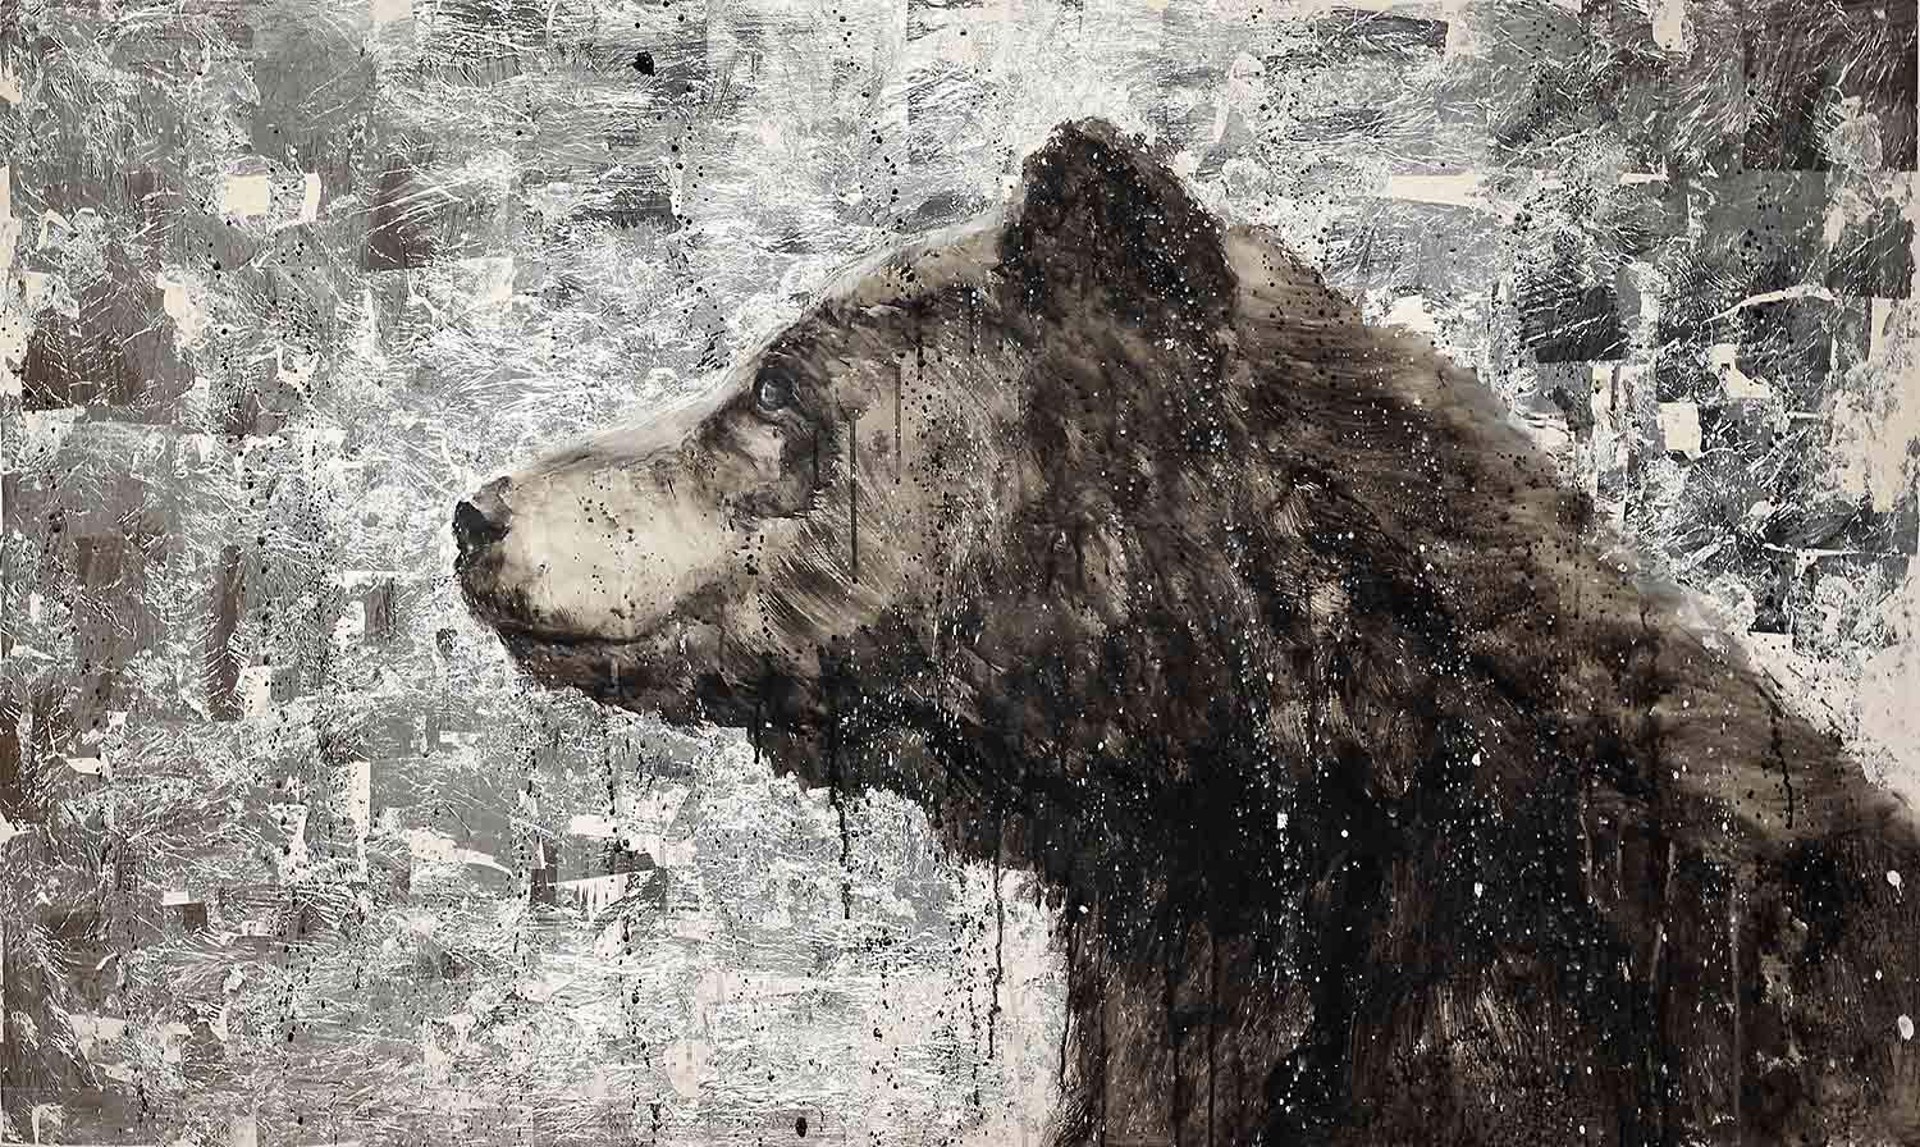 An Original Contemporary Fine Art Painting Of A Side Profile of a Bear With A Silver and Black Abstract Background By Matt Flint Using Mixed Media On Panel